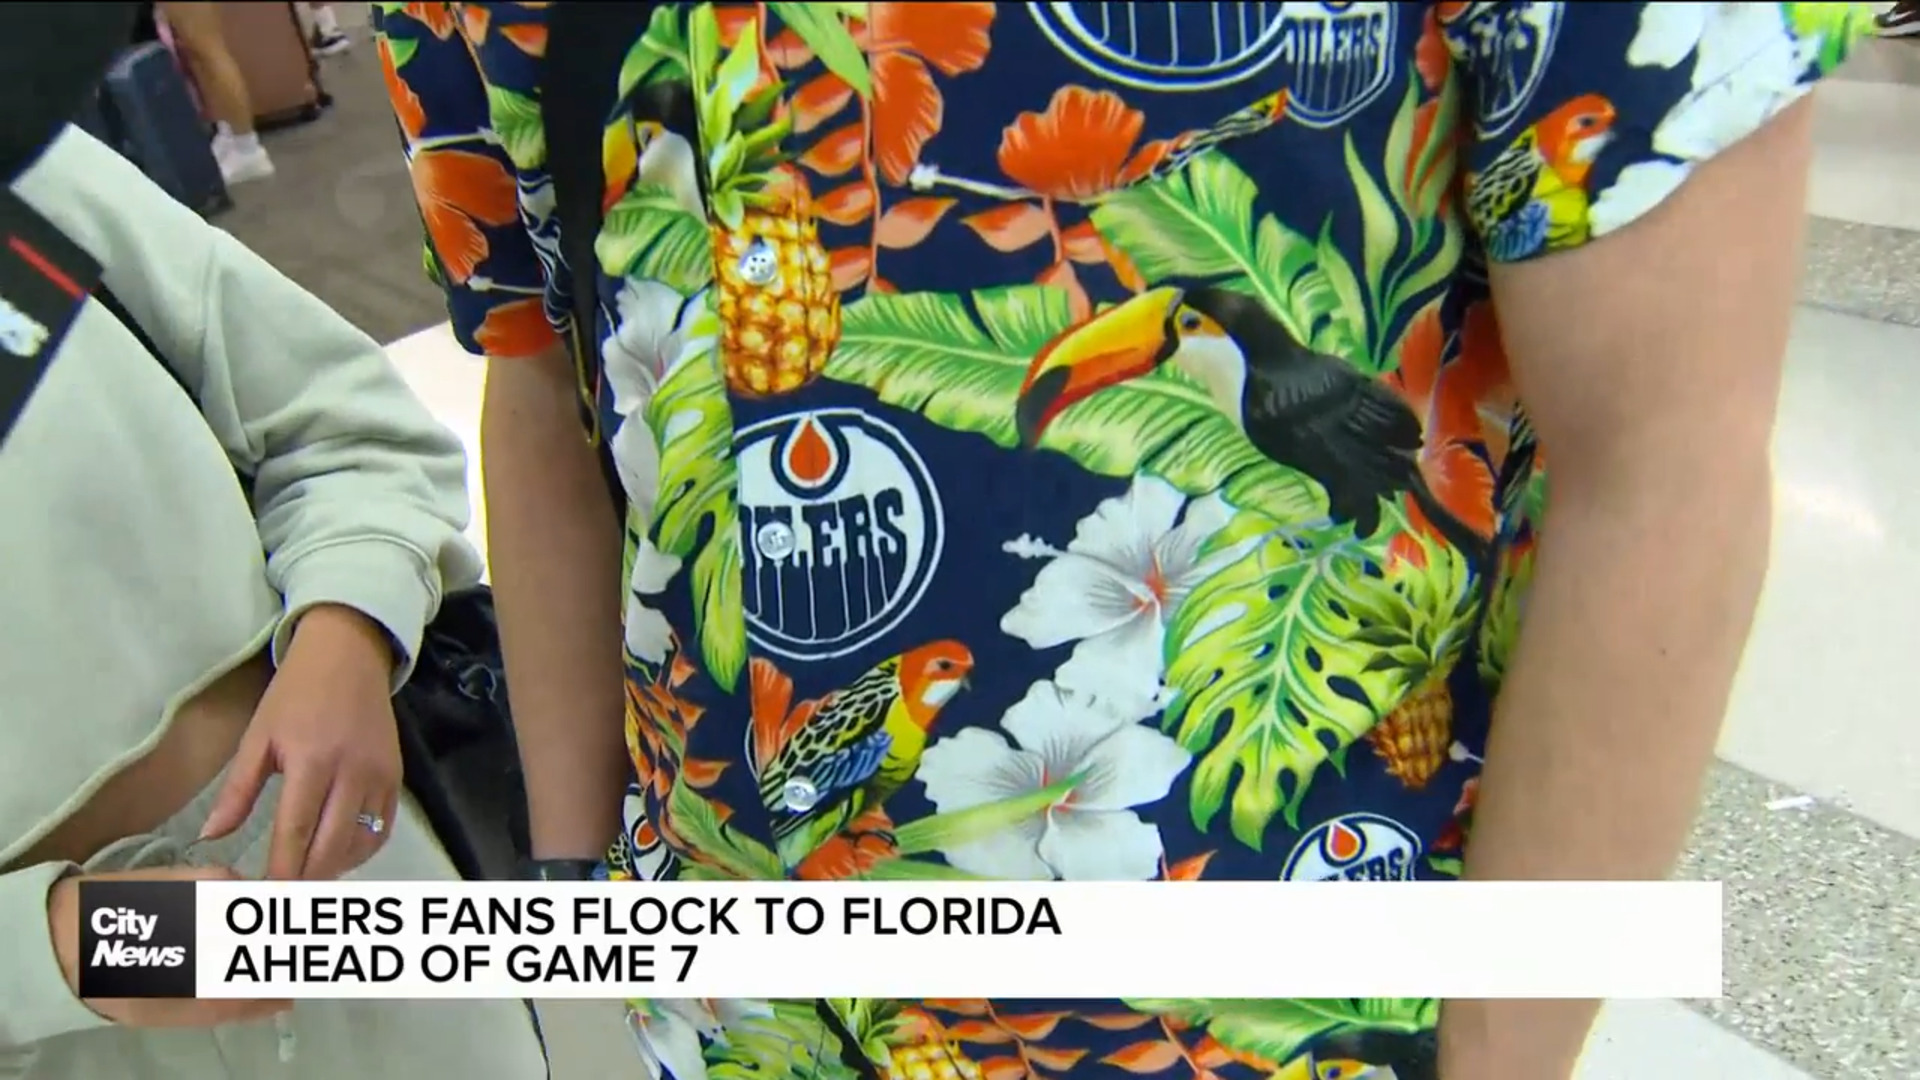 NHL Stanley Cup Final: Edmonton Oilers fans flock to Florida ahead of Game 7